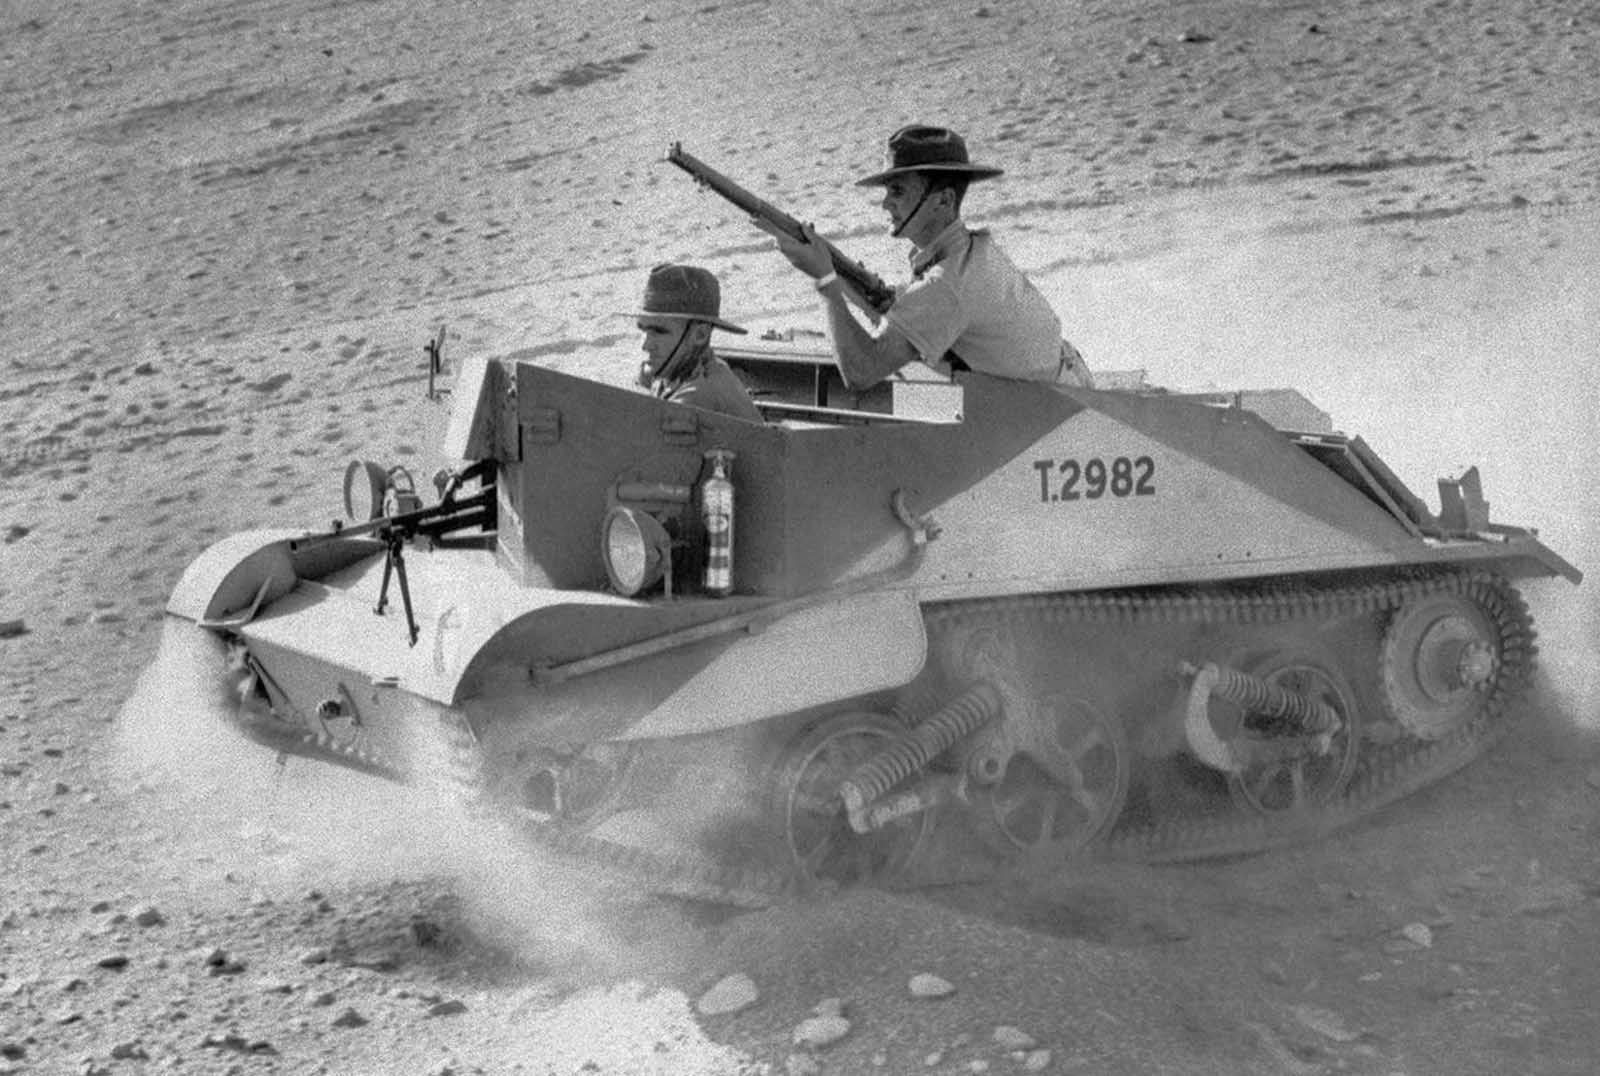 One of the Bren gun carriers used by Australian light horse troops in Northern Africa, on January 7, 1941.